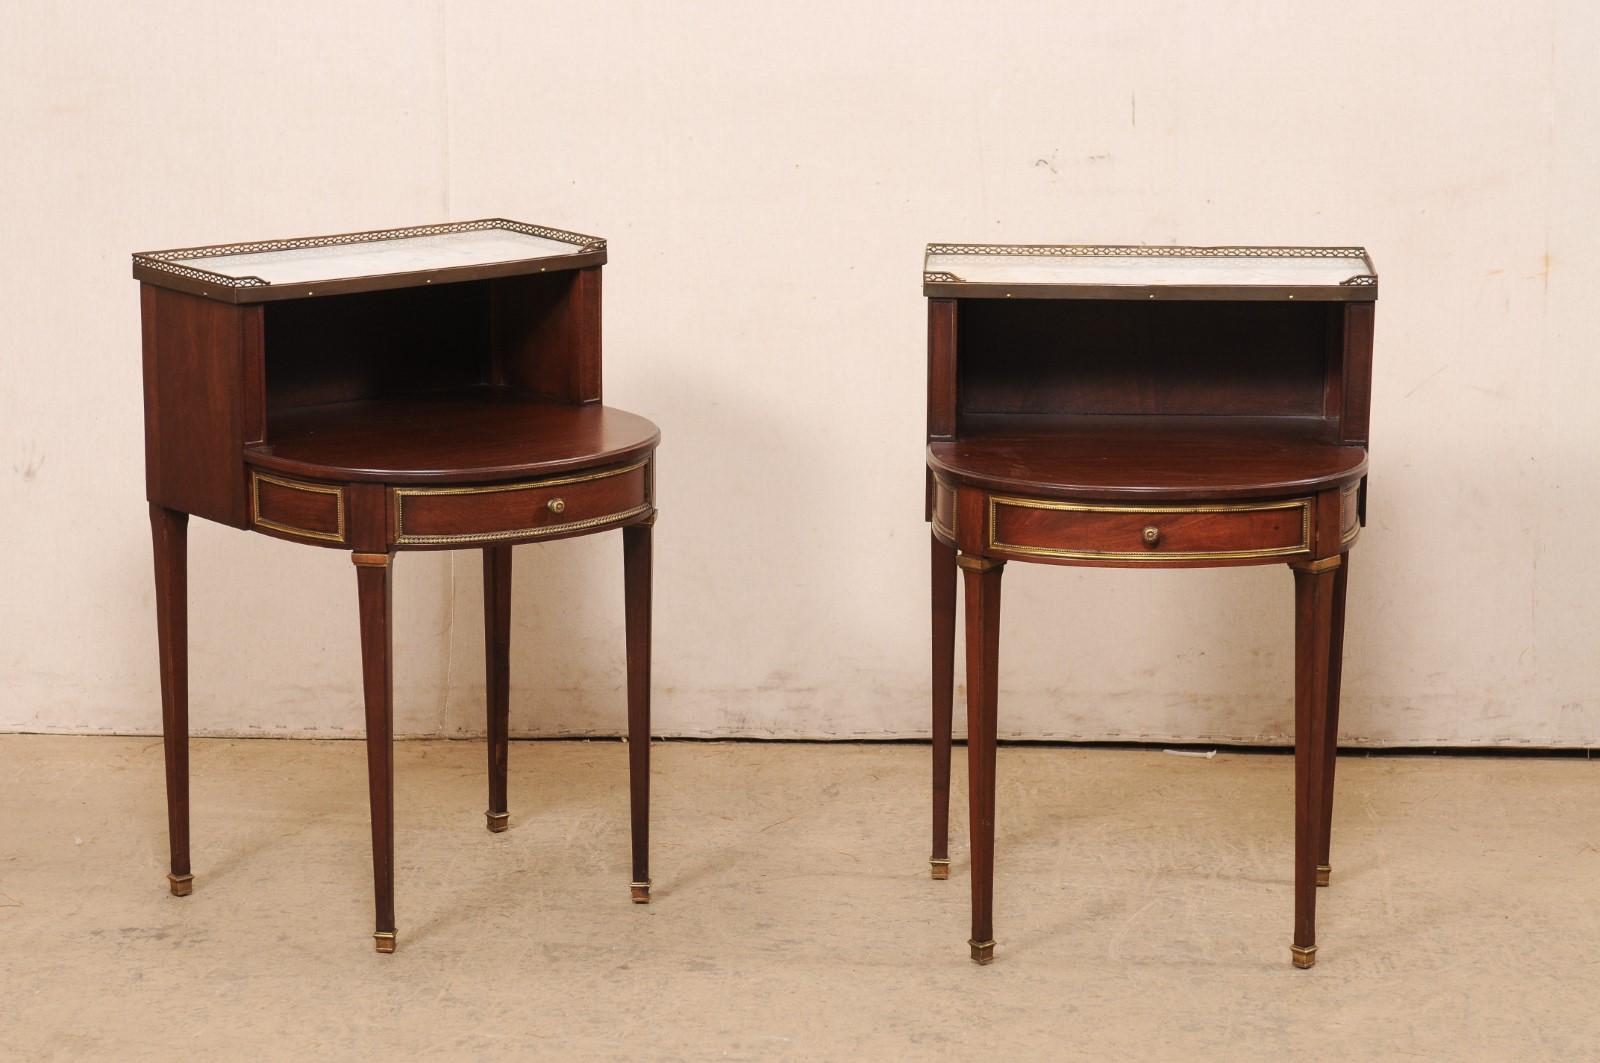 A French pair of Louis XVI style wood end tables, with marble and brass, from the 20th century. This vintage pair of petite sized tables from France, designed in Louis XVI style, each feature a rectangular-shaped white marble top, surrounded with a